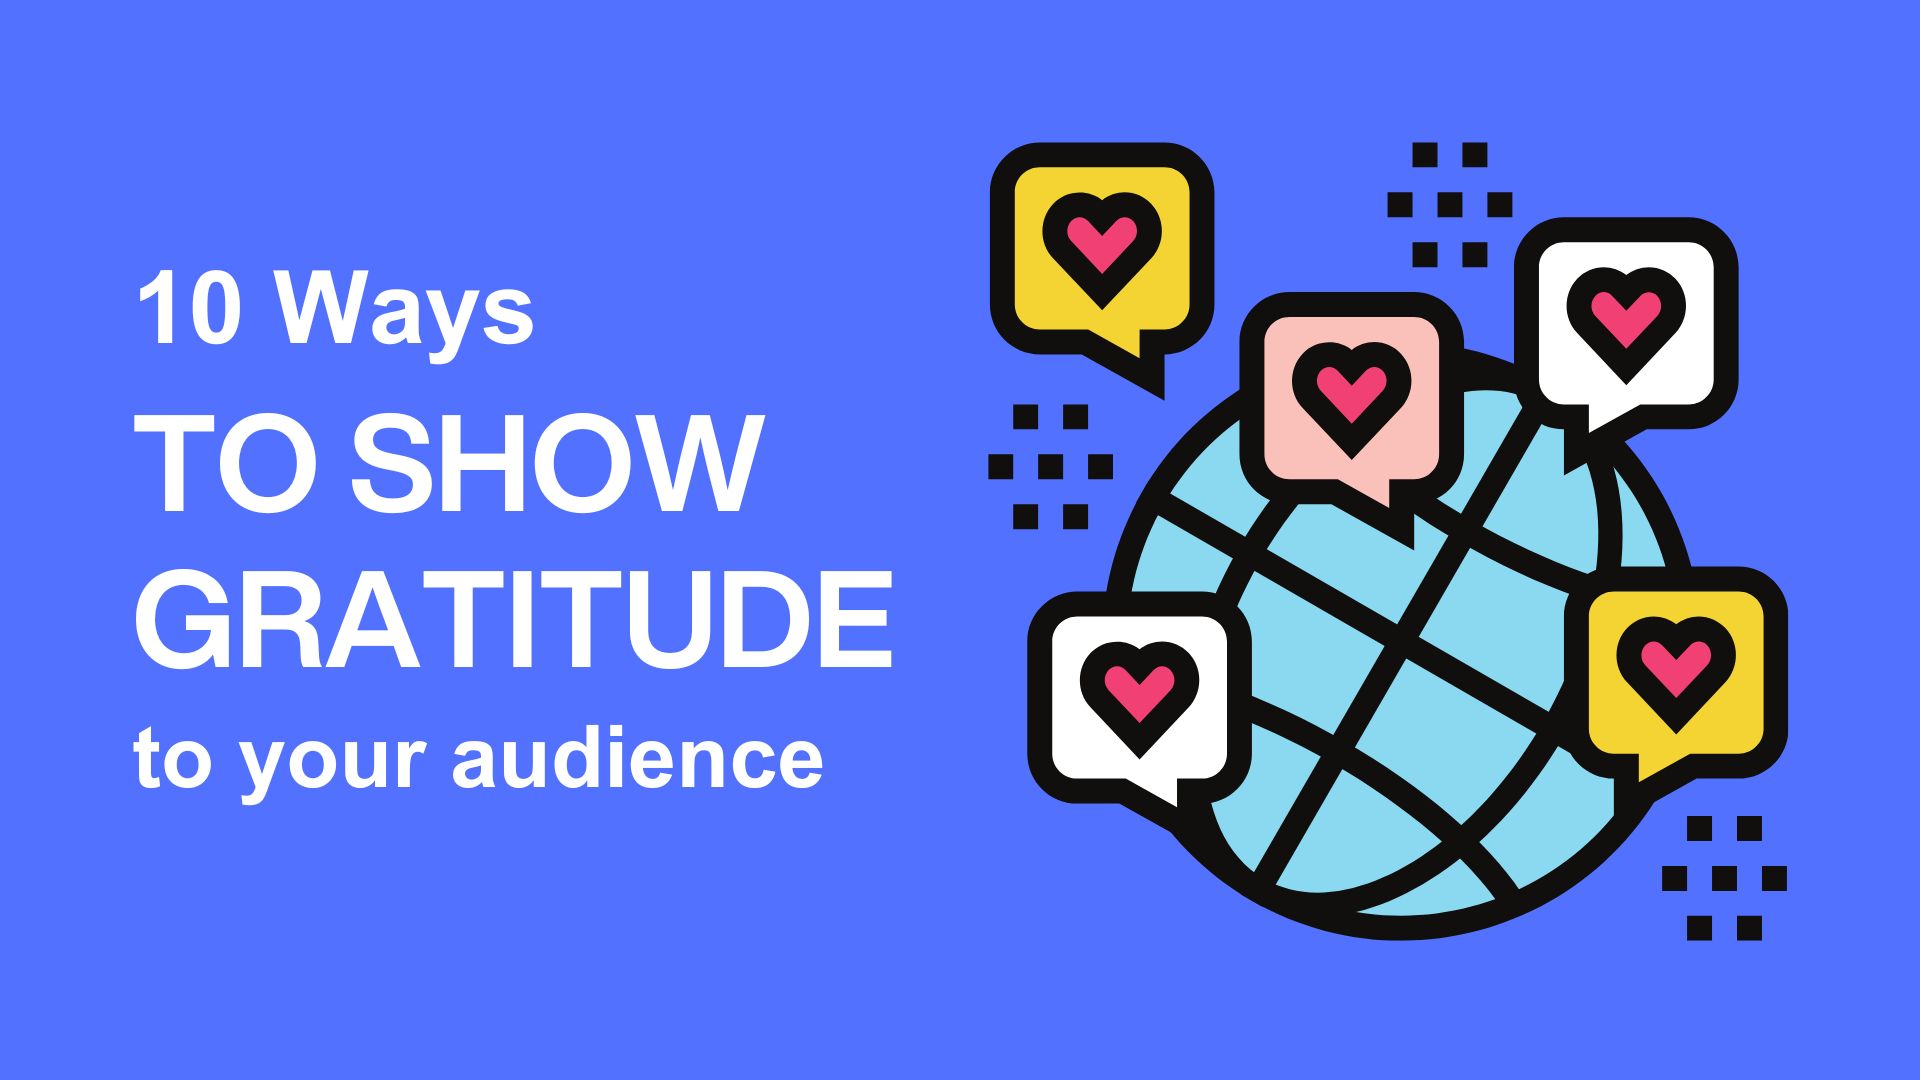 10 ways to show gratitude to your audience